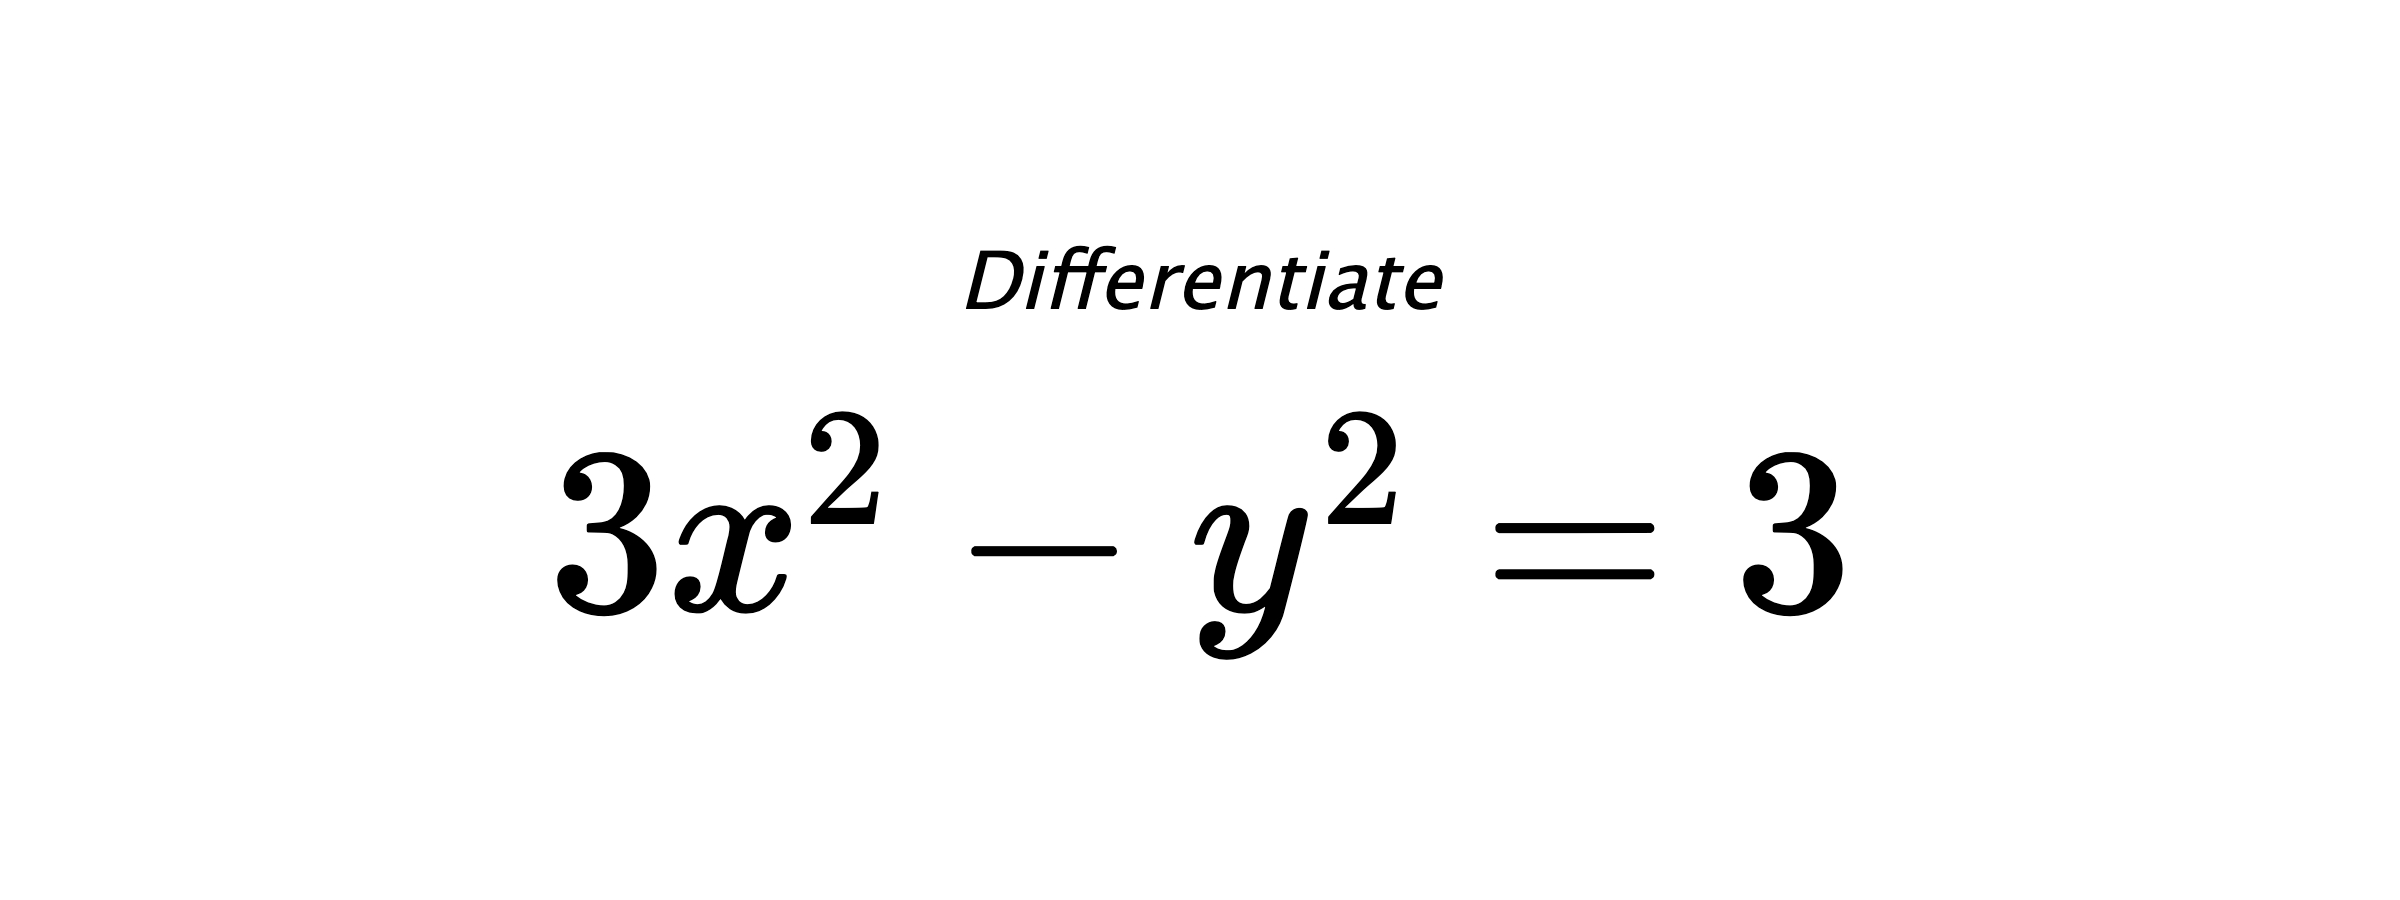 Differentiate $ 3 x^{2} - y^{2} = 3 $